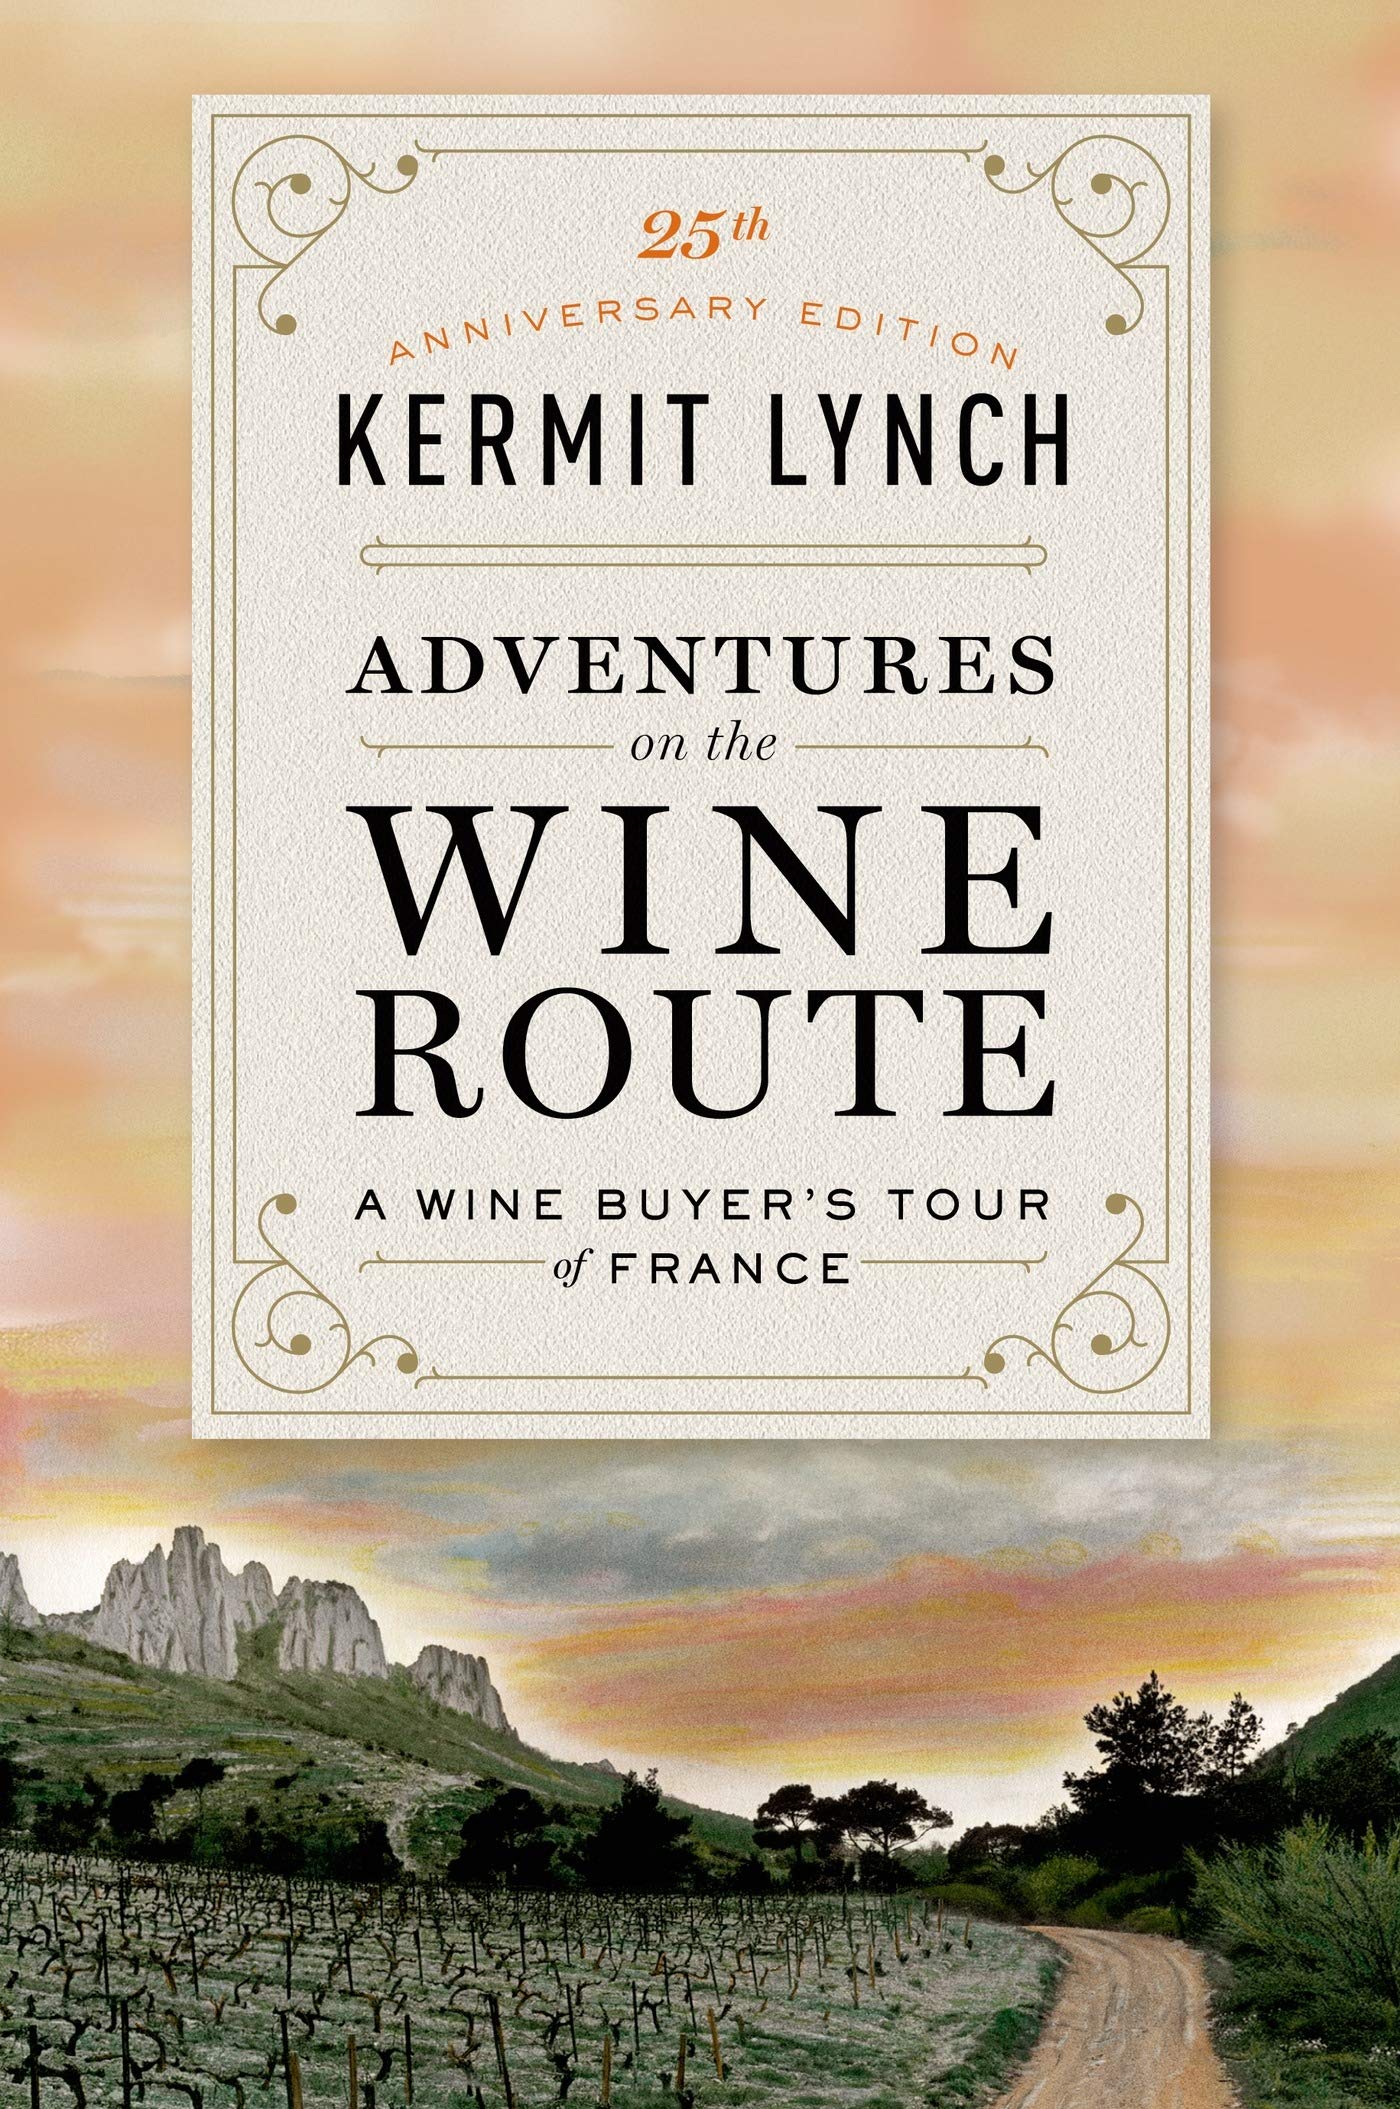 Adventures on the Wine Route: A Wine Buyer's Tour of France, 25th Anniversary Edition (Kermit Lynch)